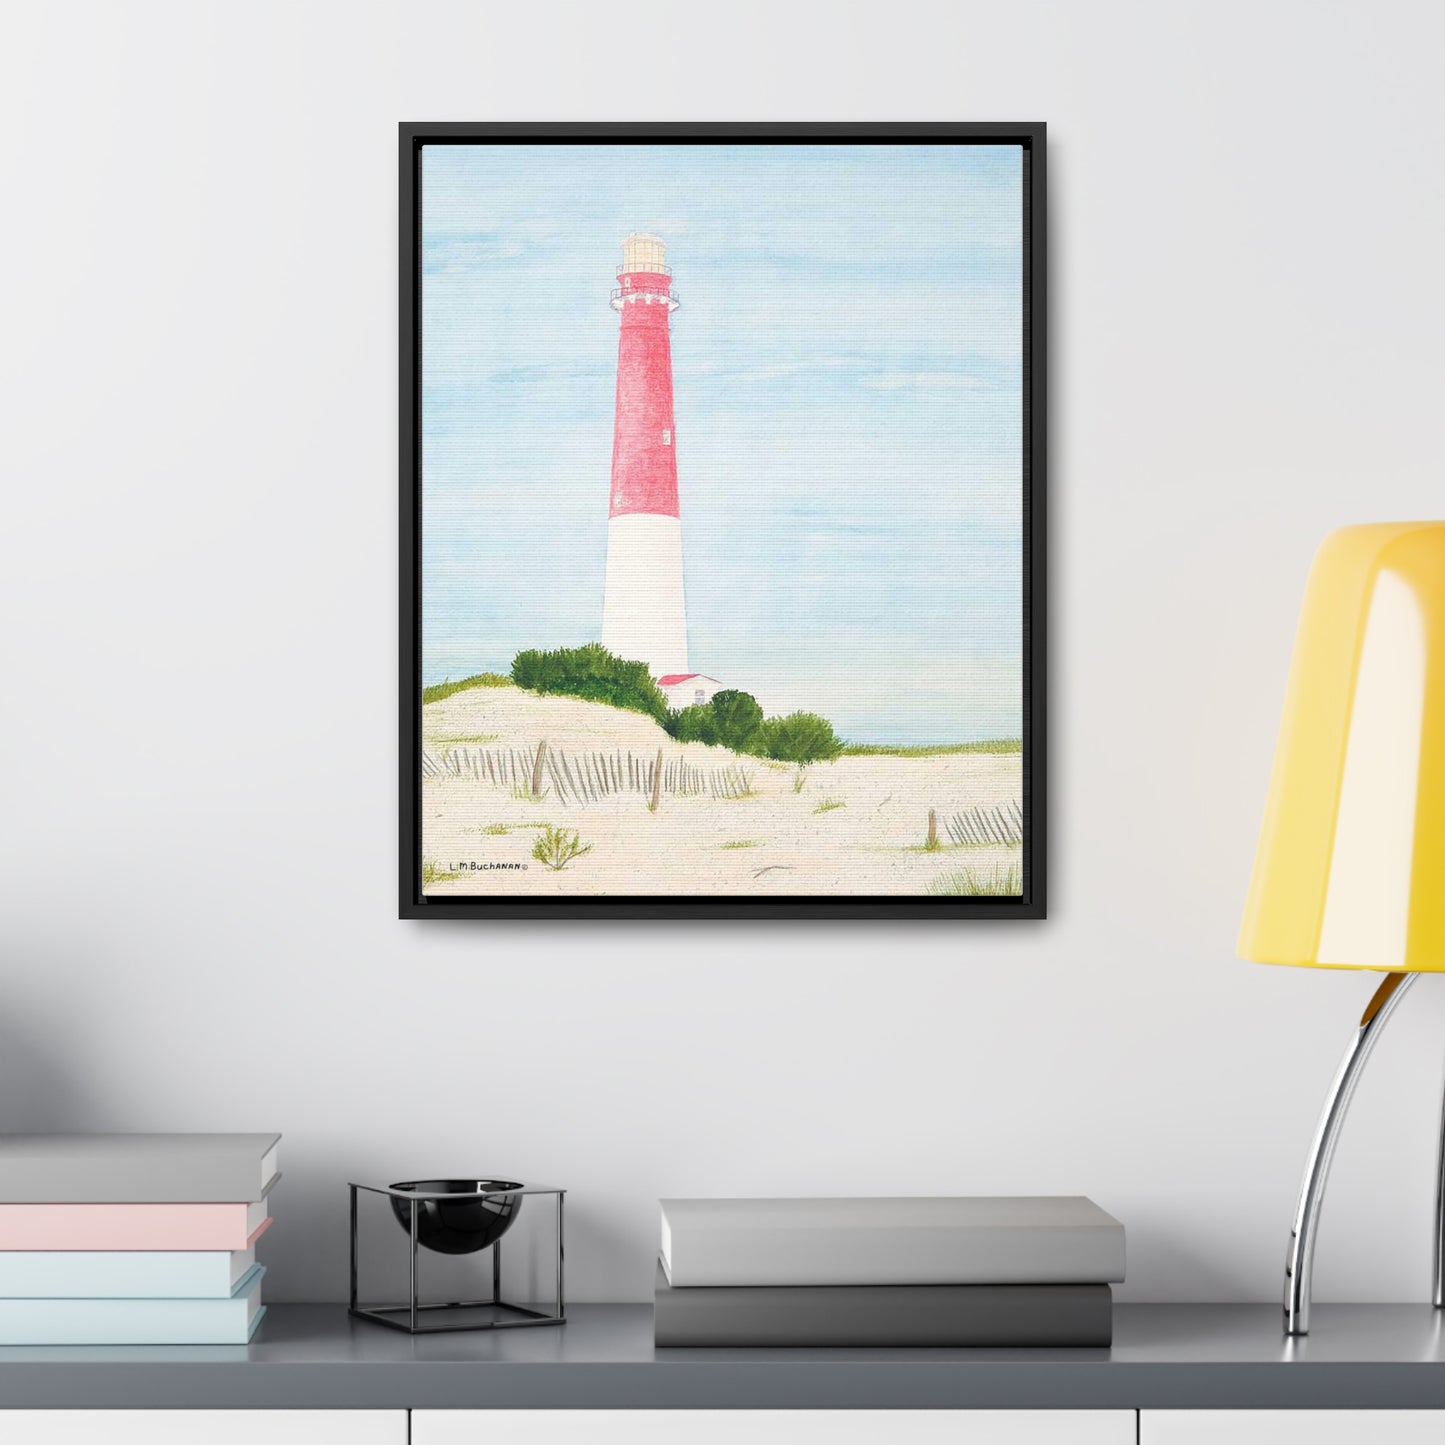 The Barnegat Lighthouse Gallery Canvas Wrap will add an attractive focal point to your room.